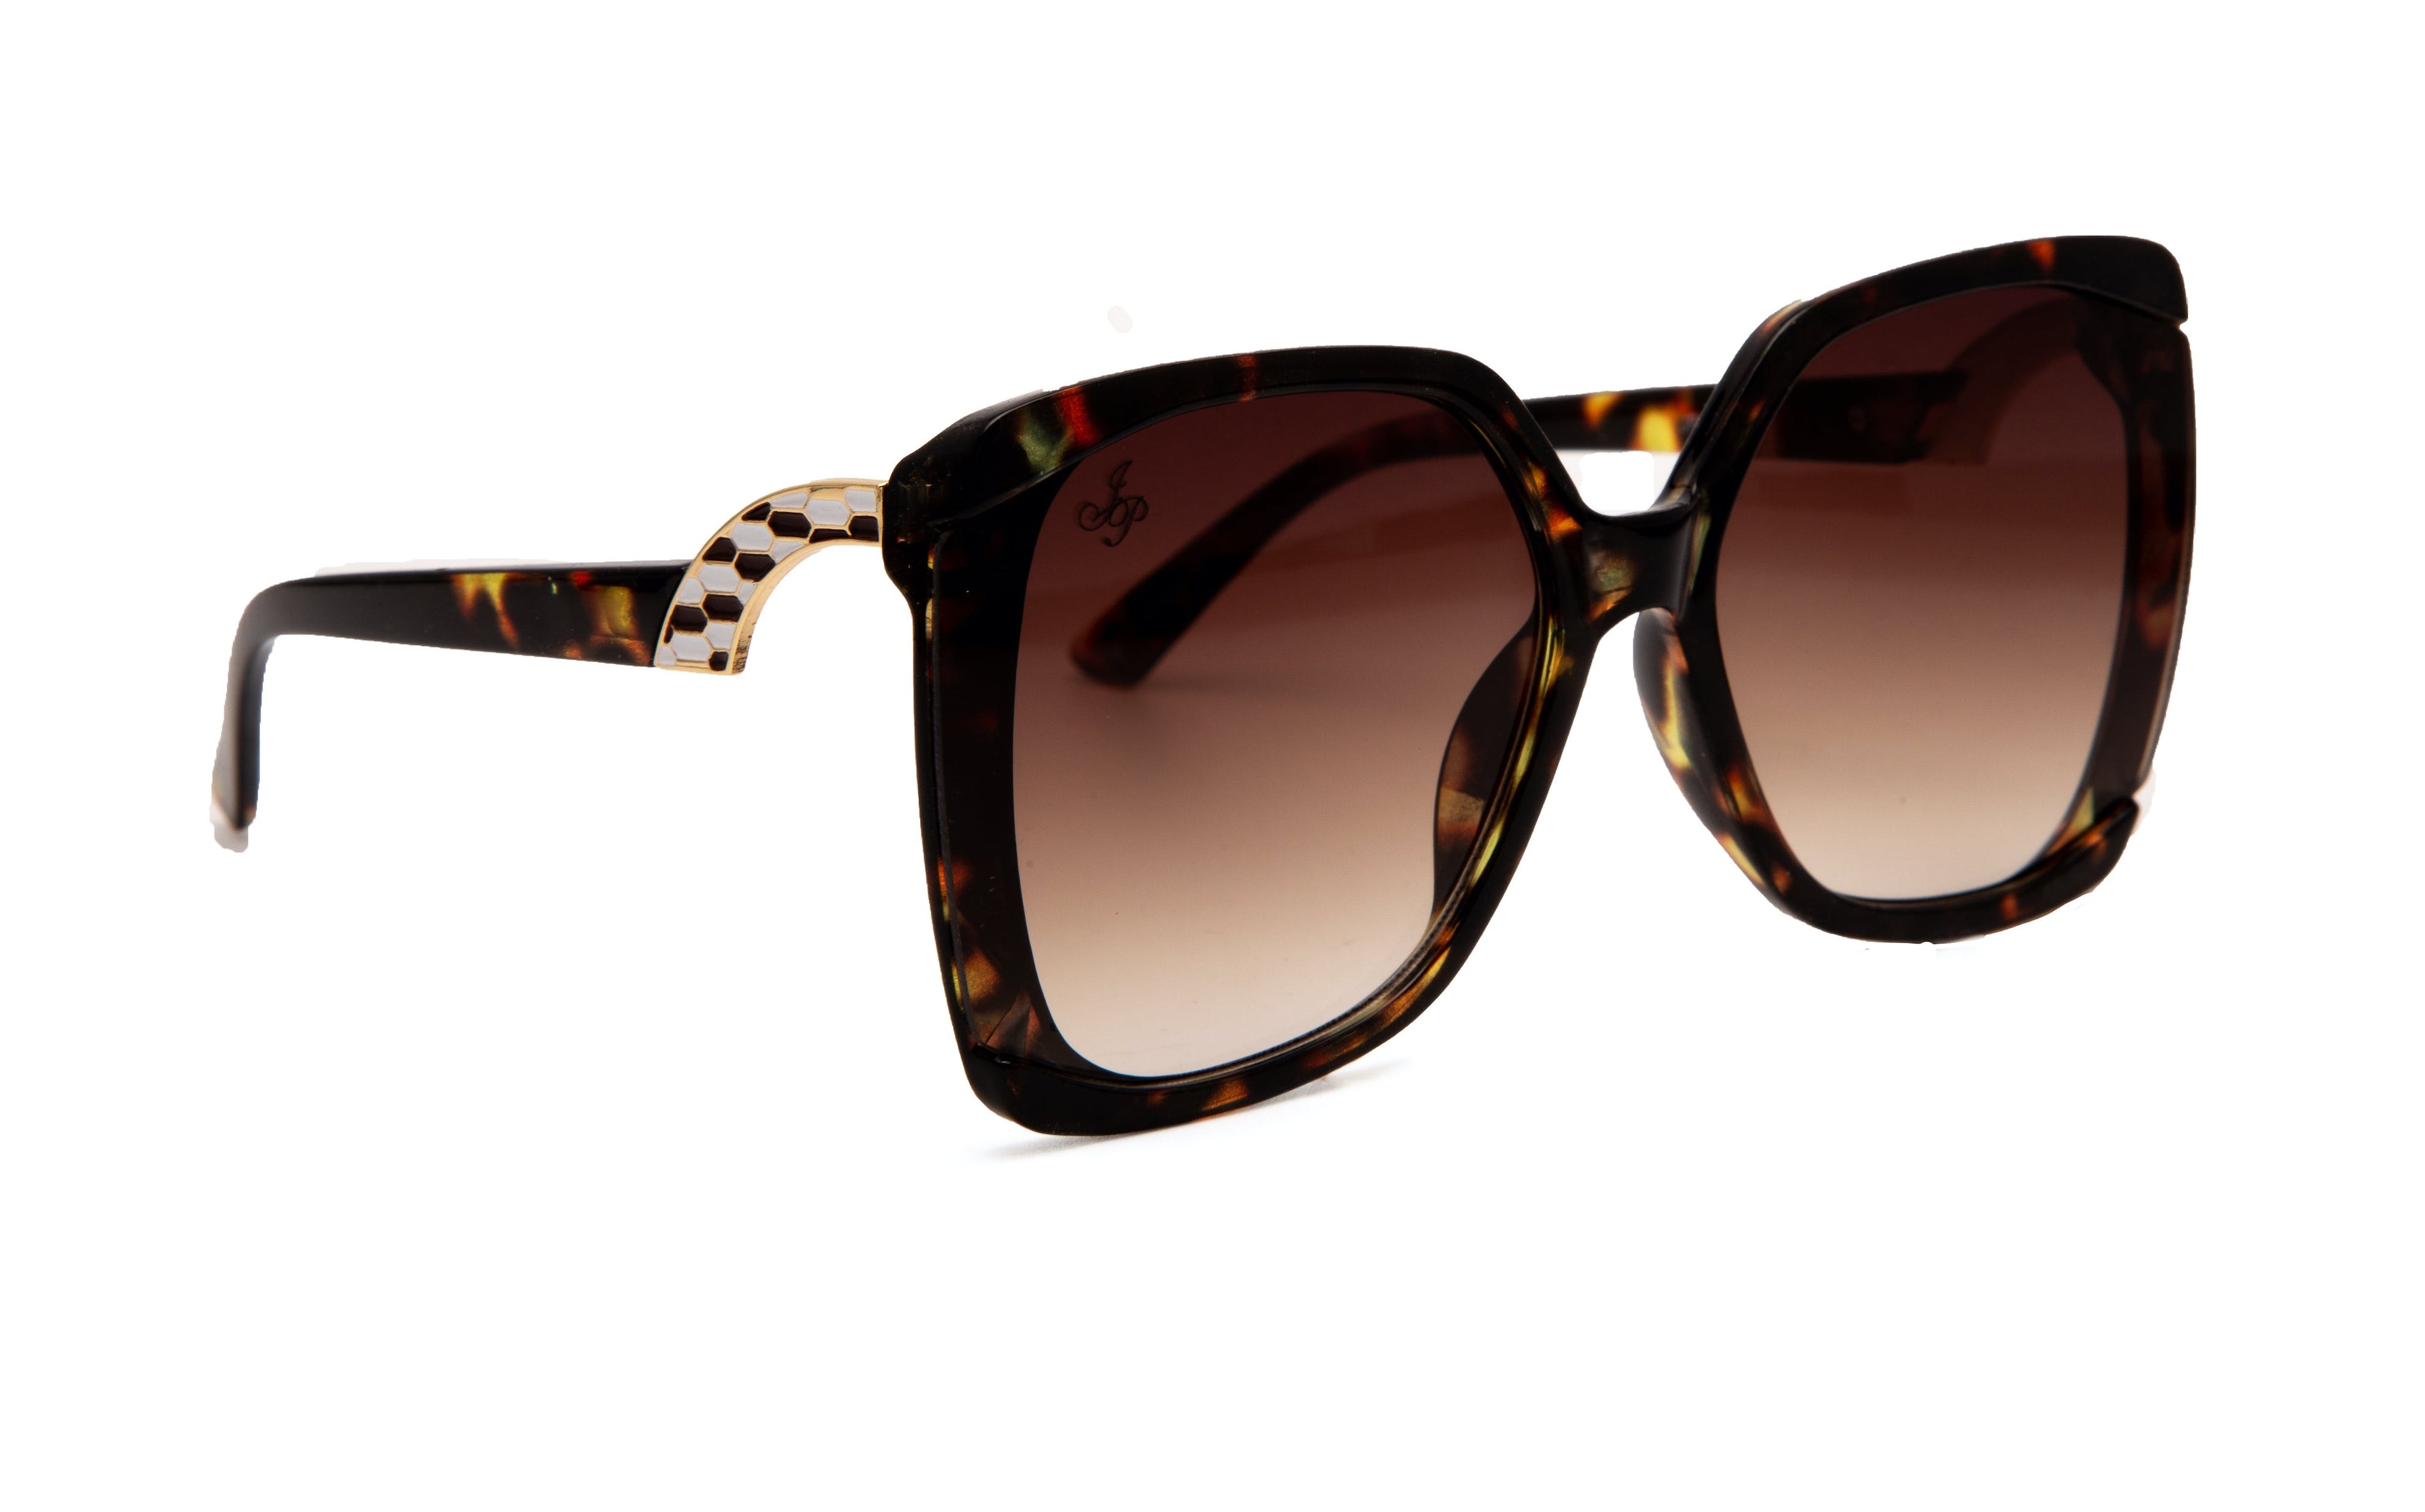 LARGE SQUARE TORT FRAME SUNGLASSES WITH BROWN GRAD LENSES